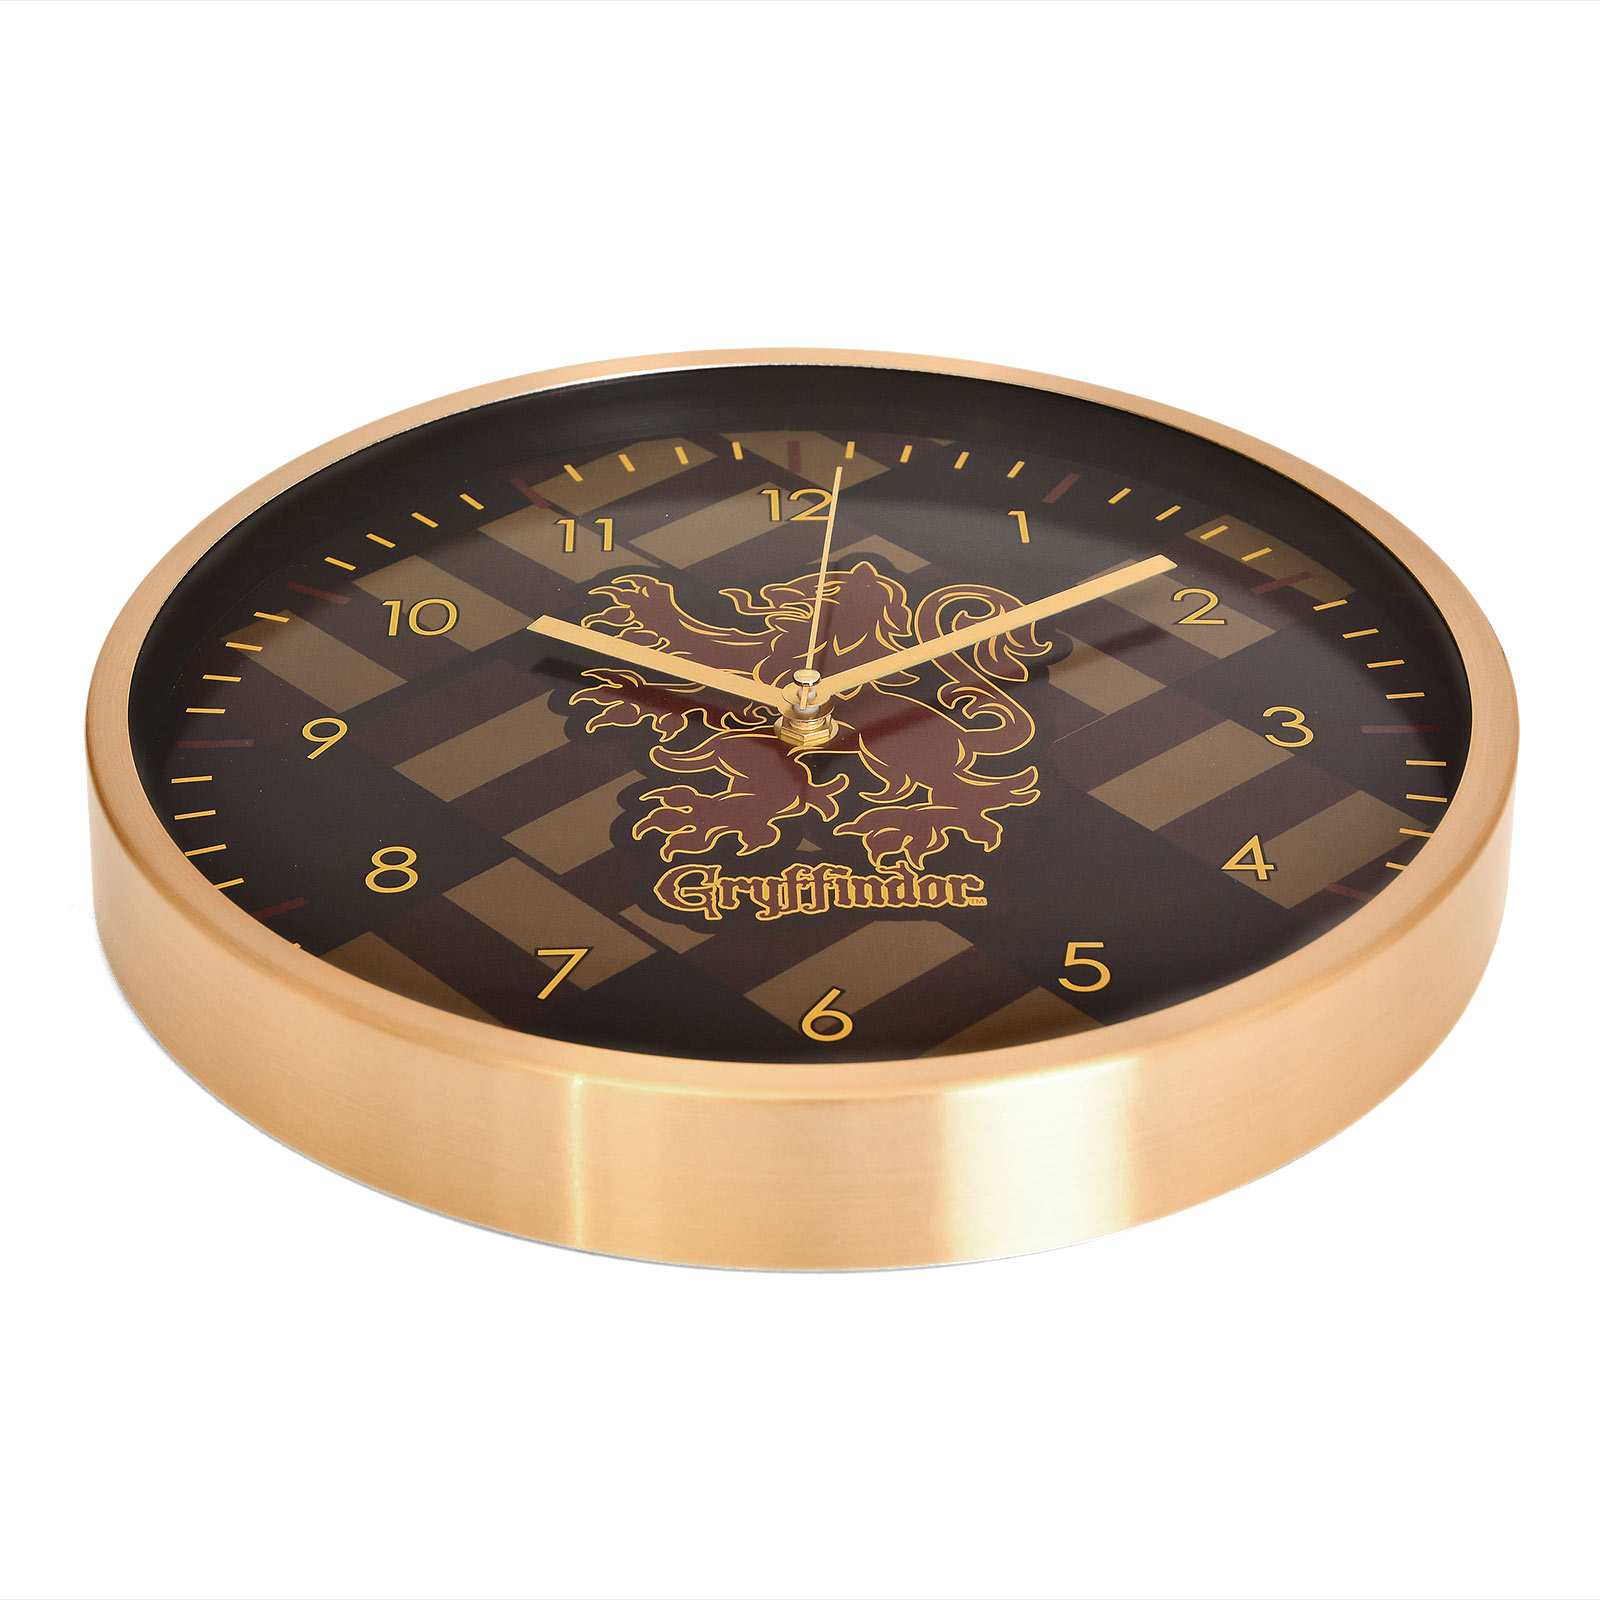 Harry Potter - Gryffindor Wall Clock